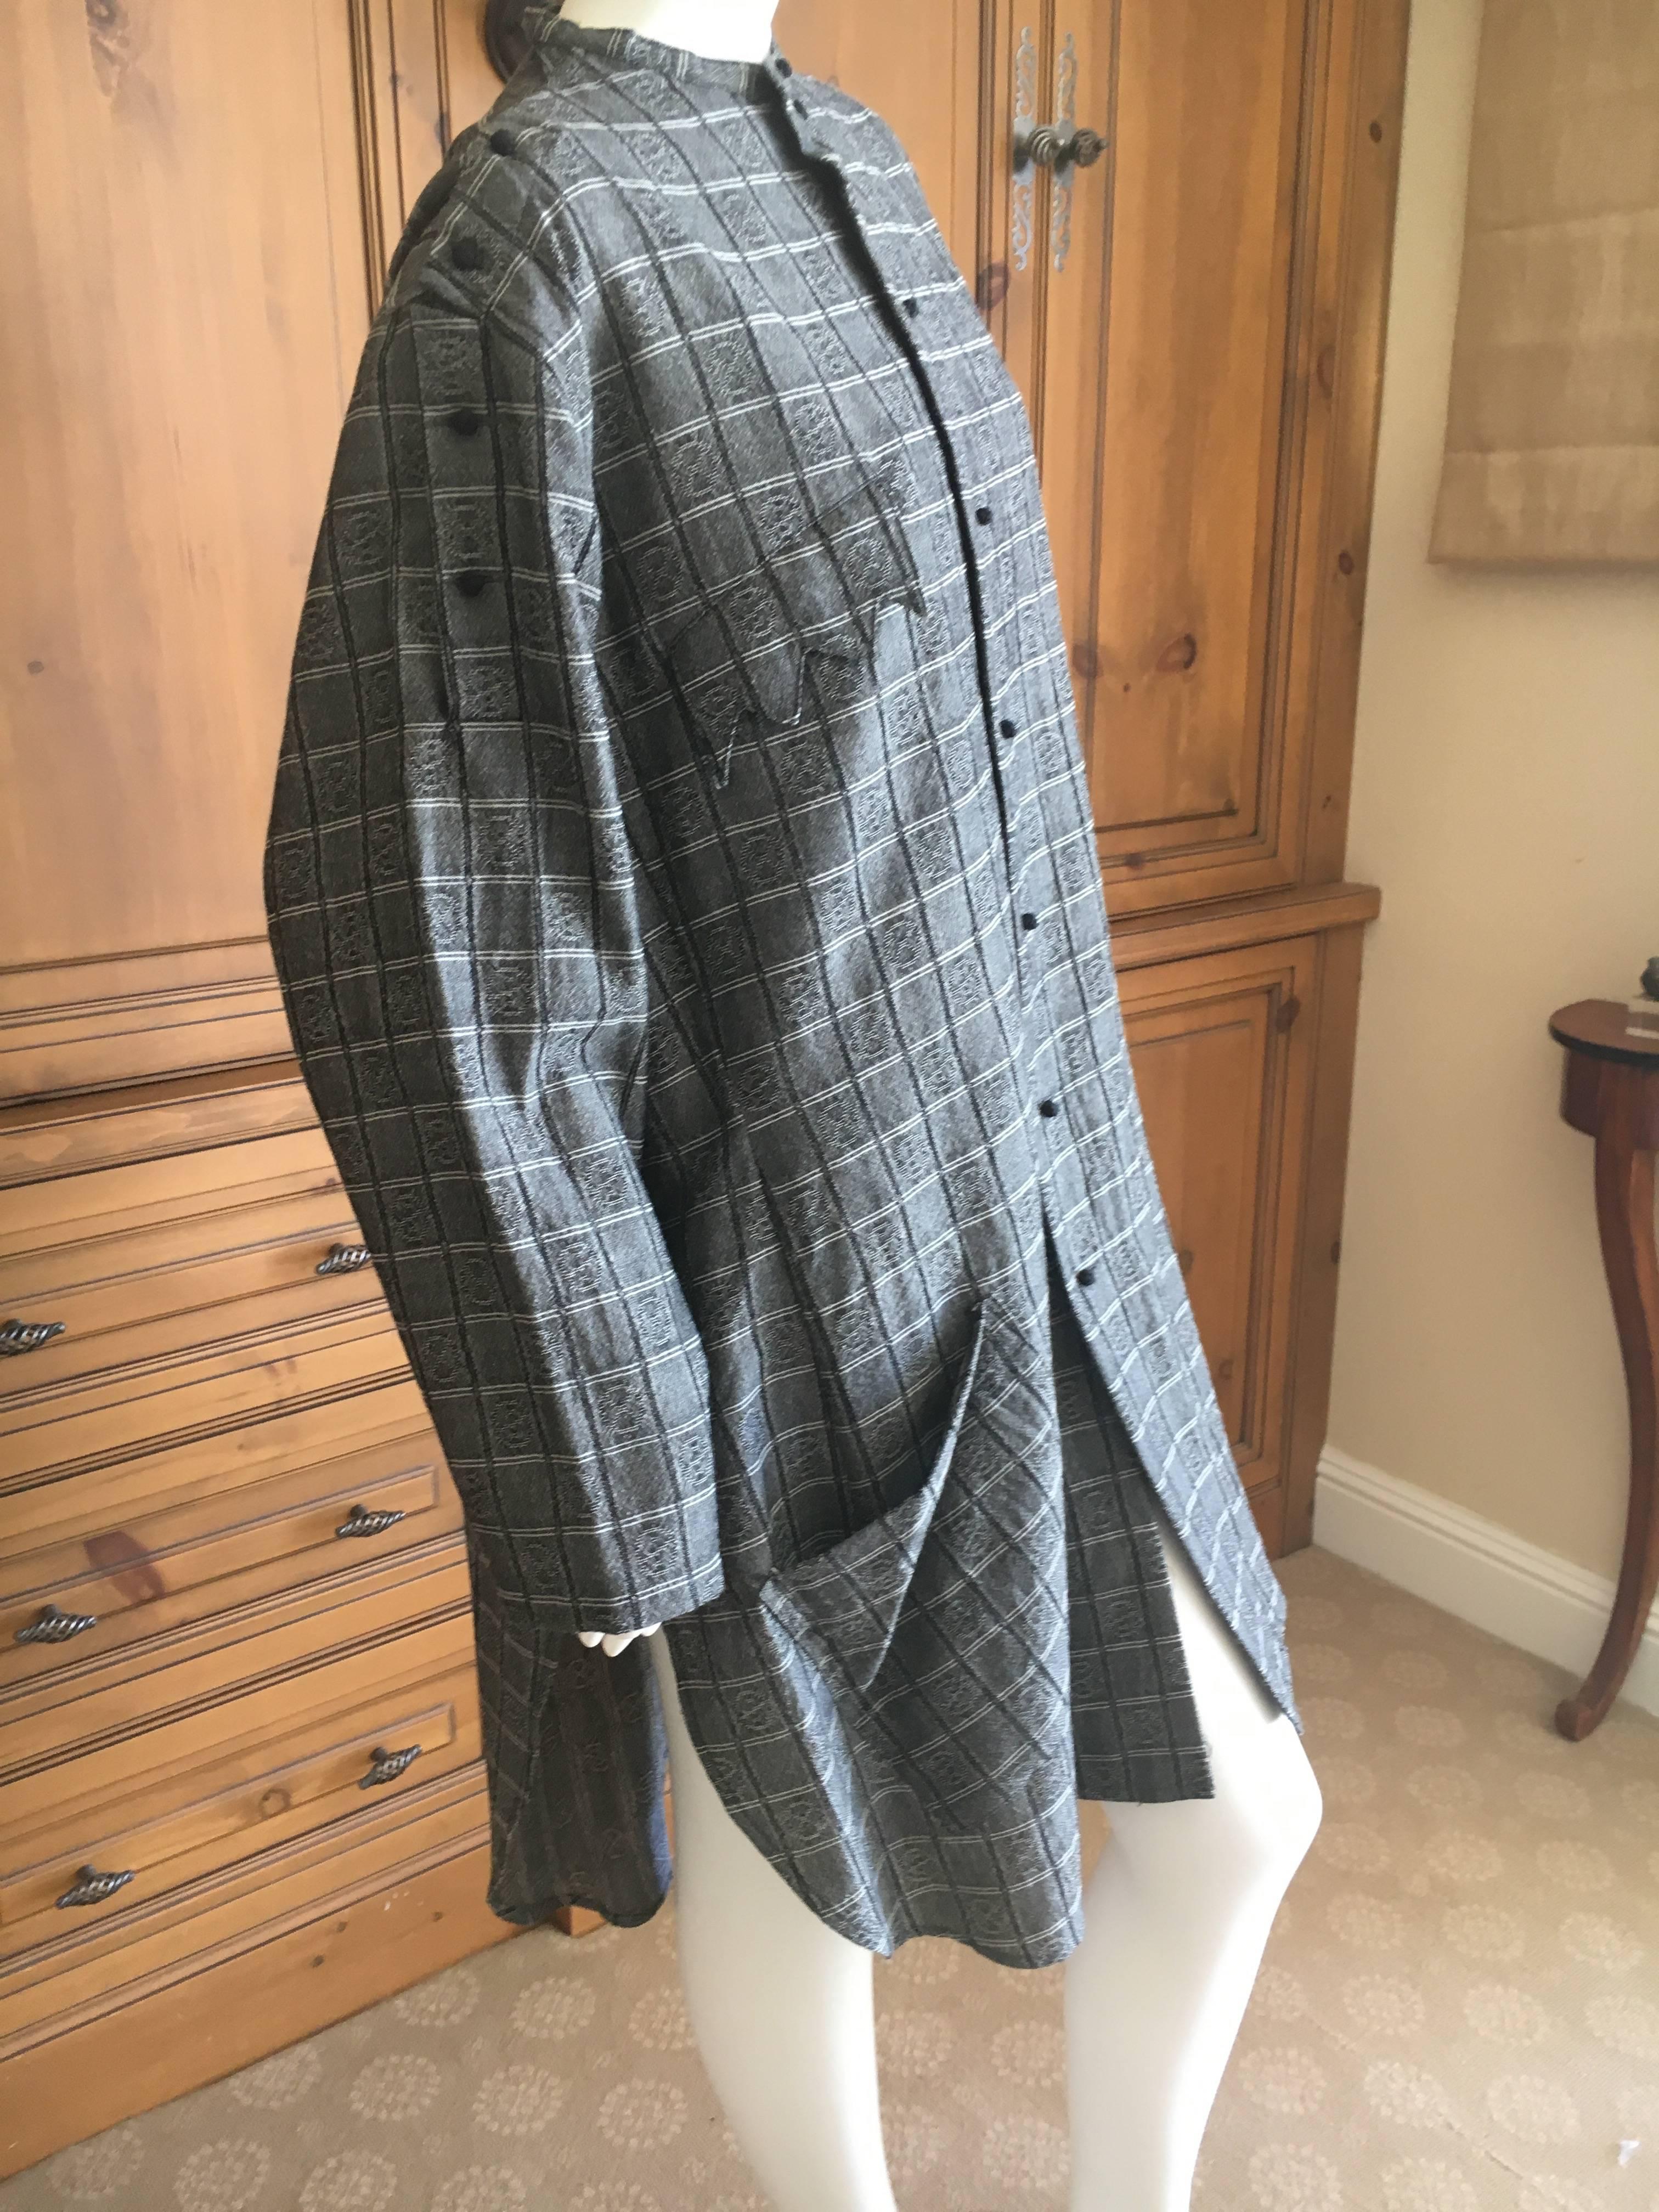 Yohji Yamamoto Vintage Gray Plaid Shirt Dress with Sawtooth Pocket In Excellent Condition For Sale In Cloverdale, CA